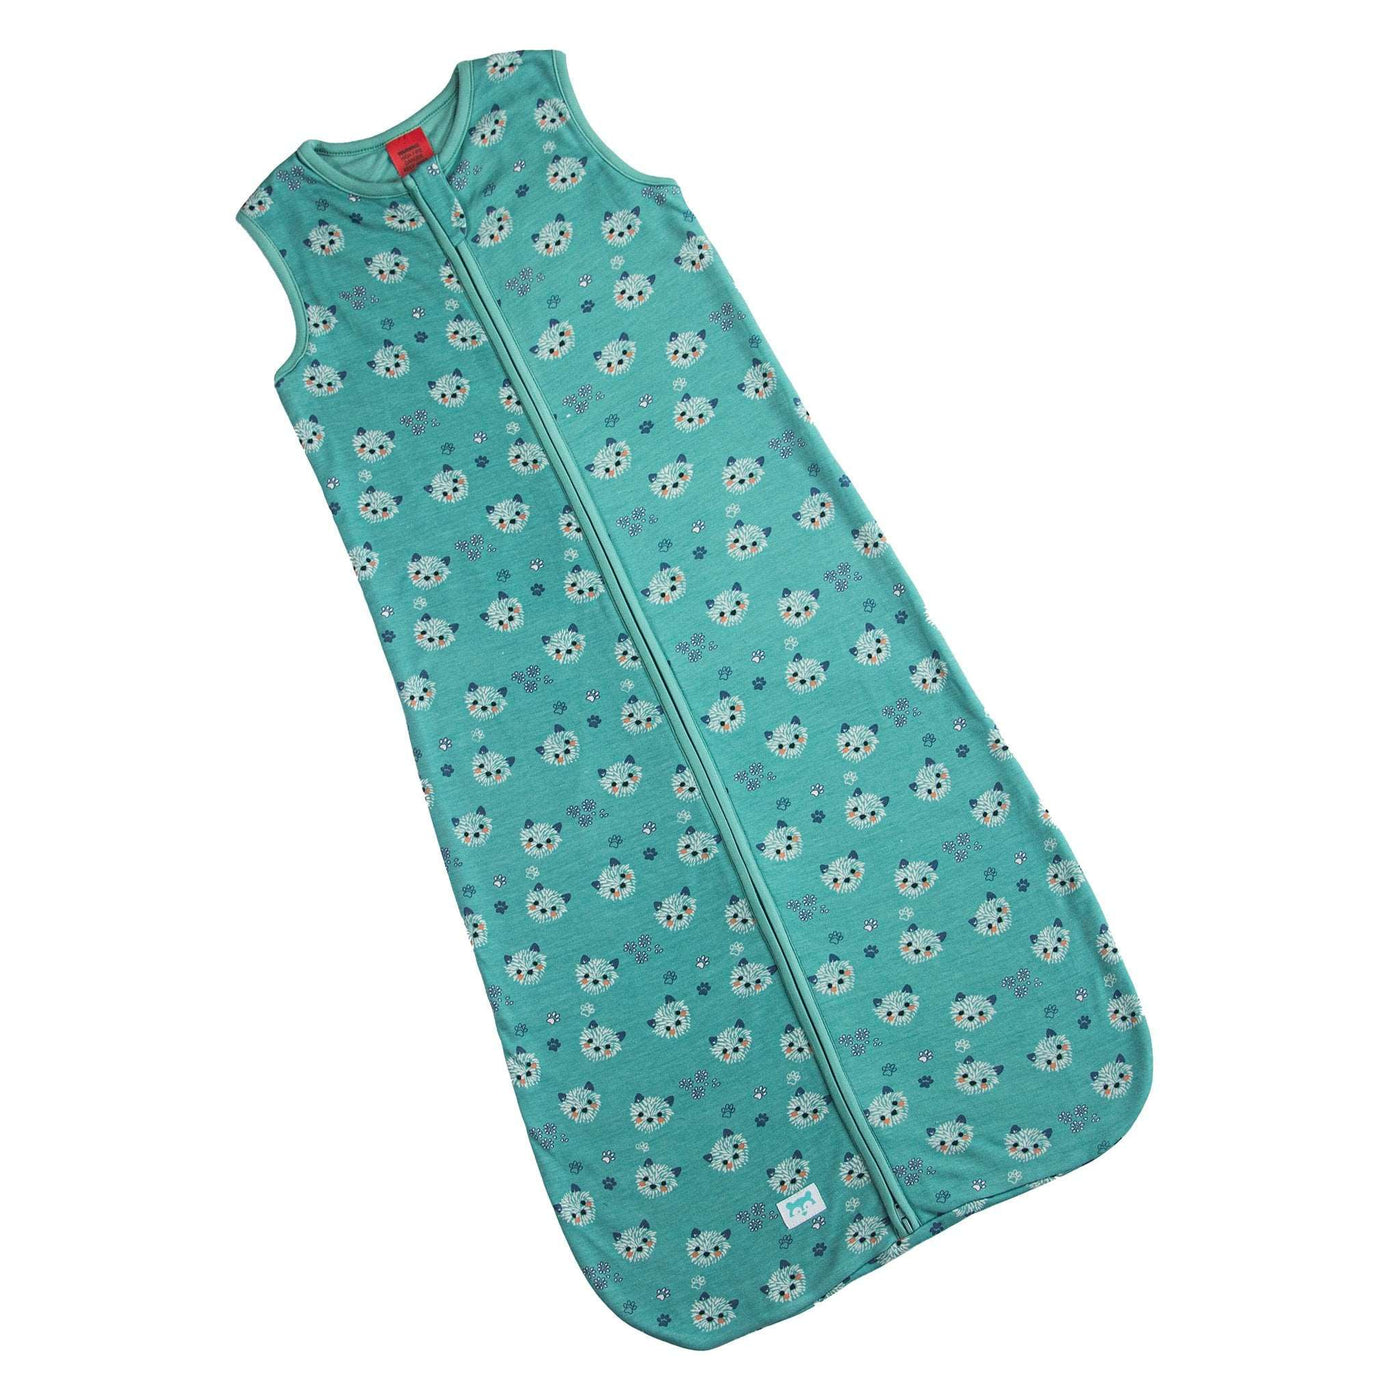 Baby sleeping bag for toddlers